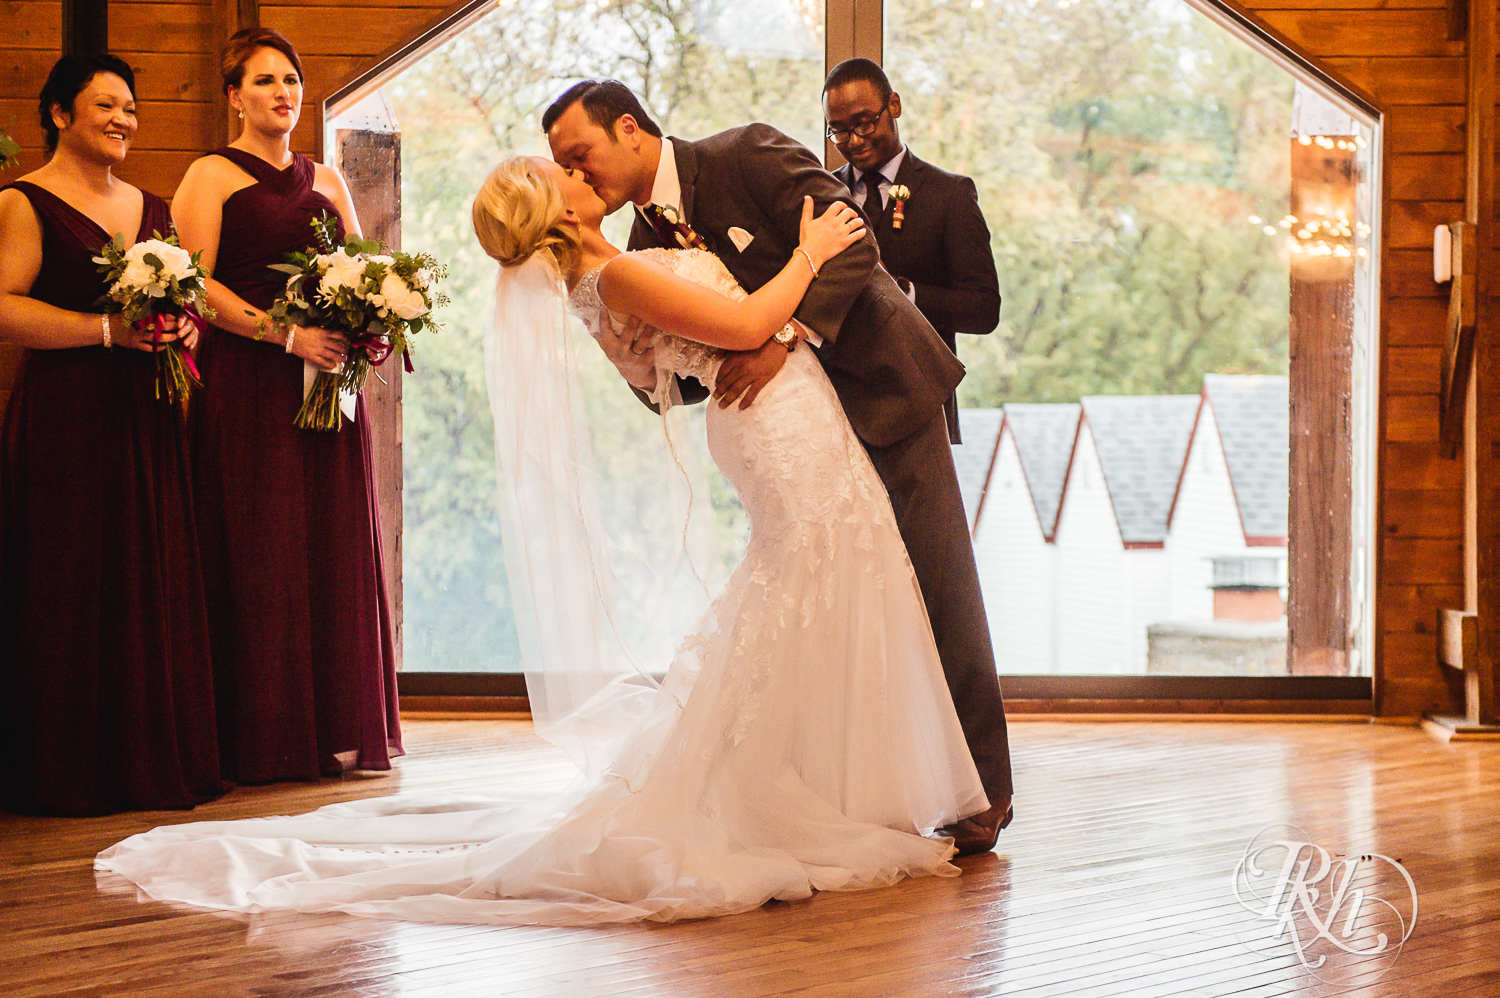 Bride and groom kiss at Green Acres Event Center barn wedding ceremony in Eden Prairie, Minnesota.